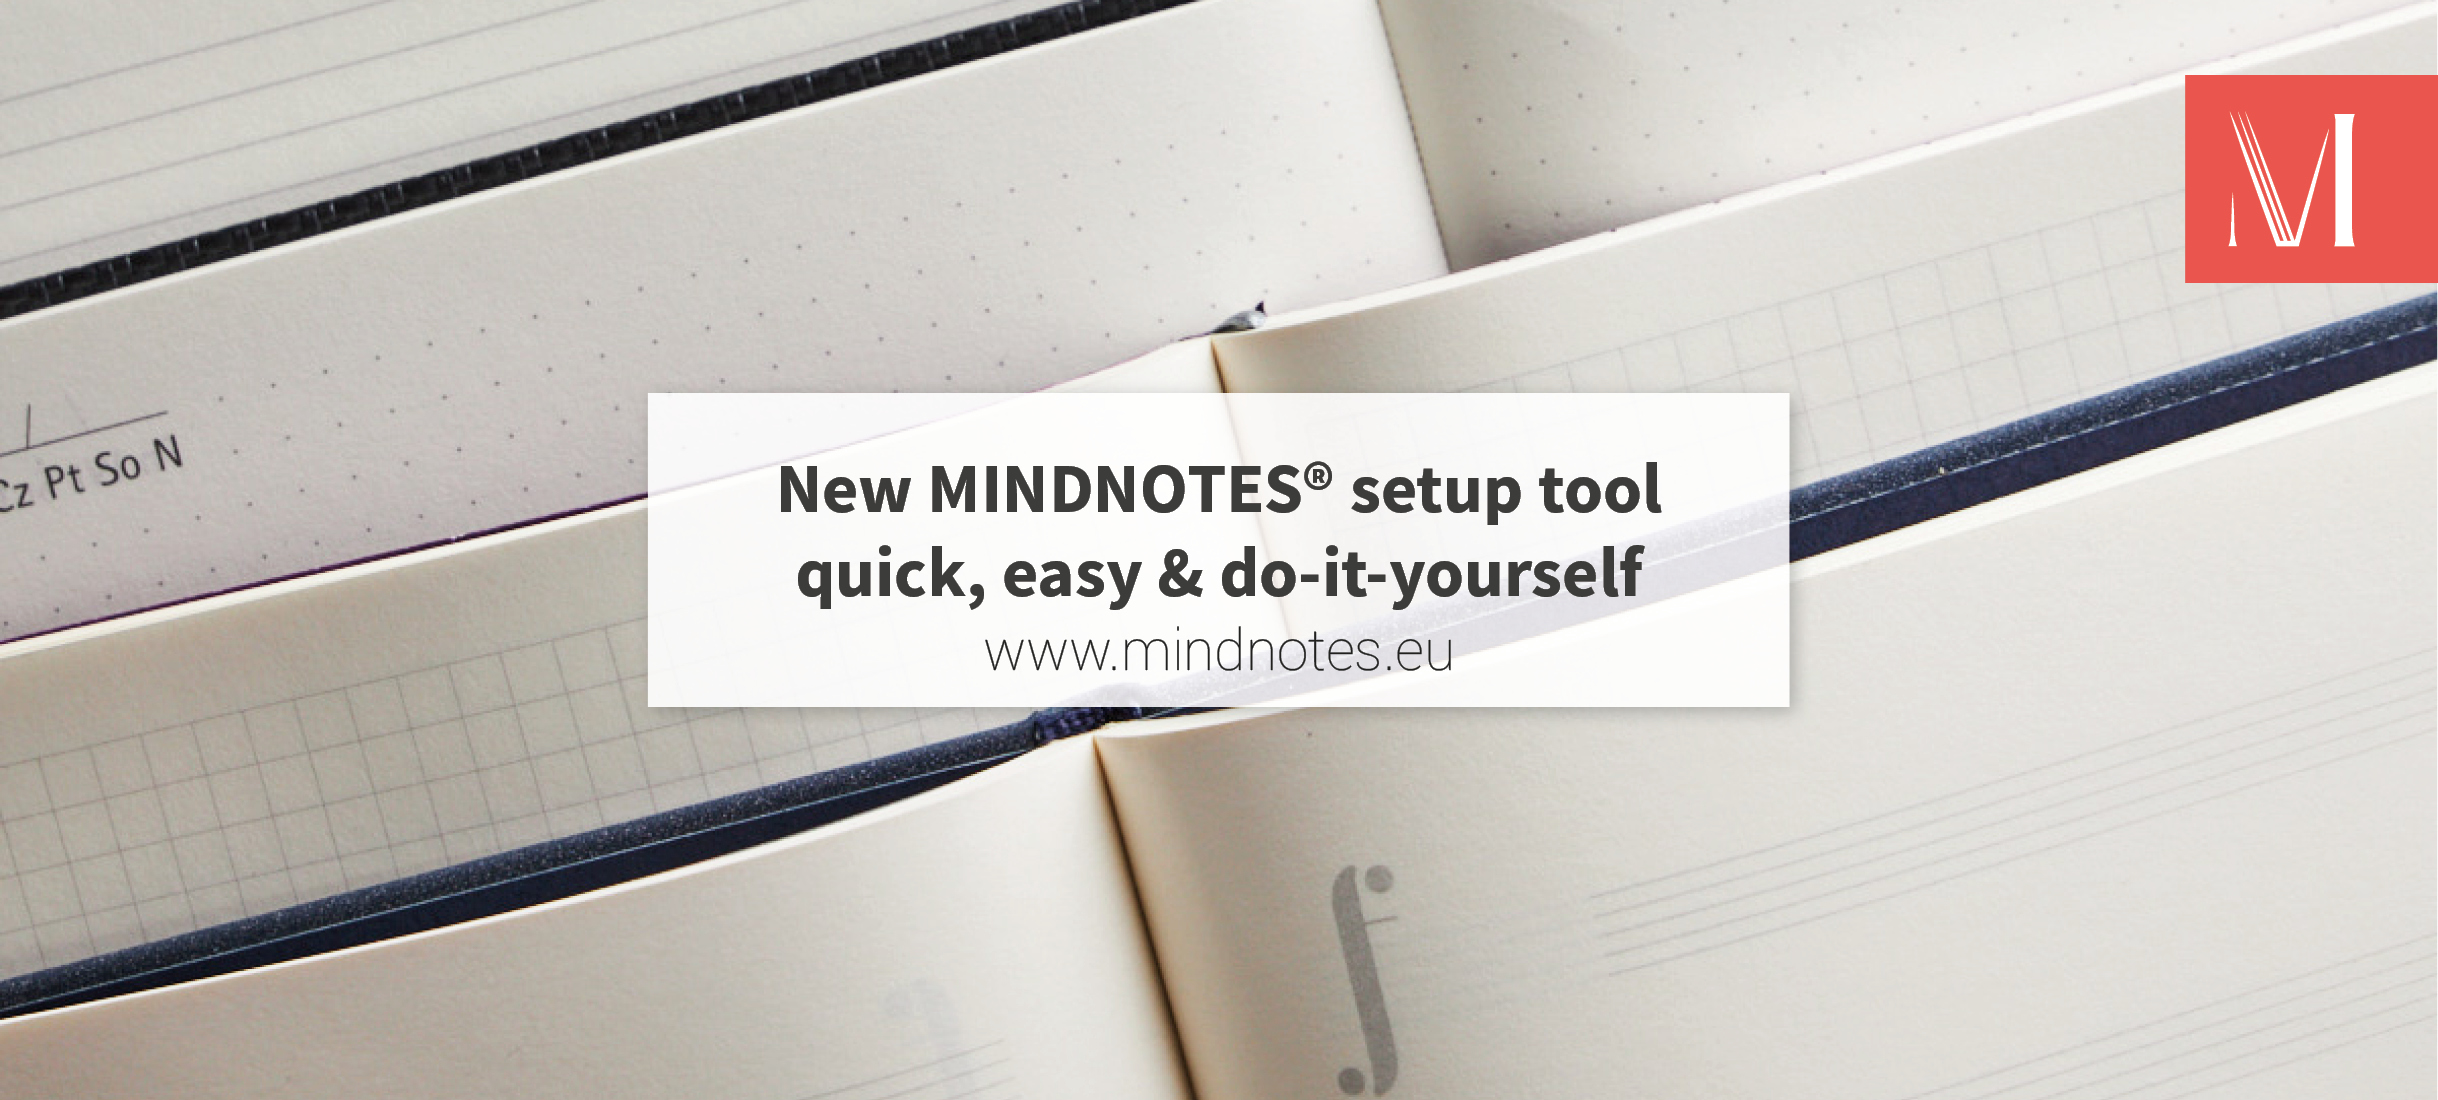 New MINDNOTES® setup tool: quick, easy & do-it-yourself.